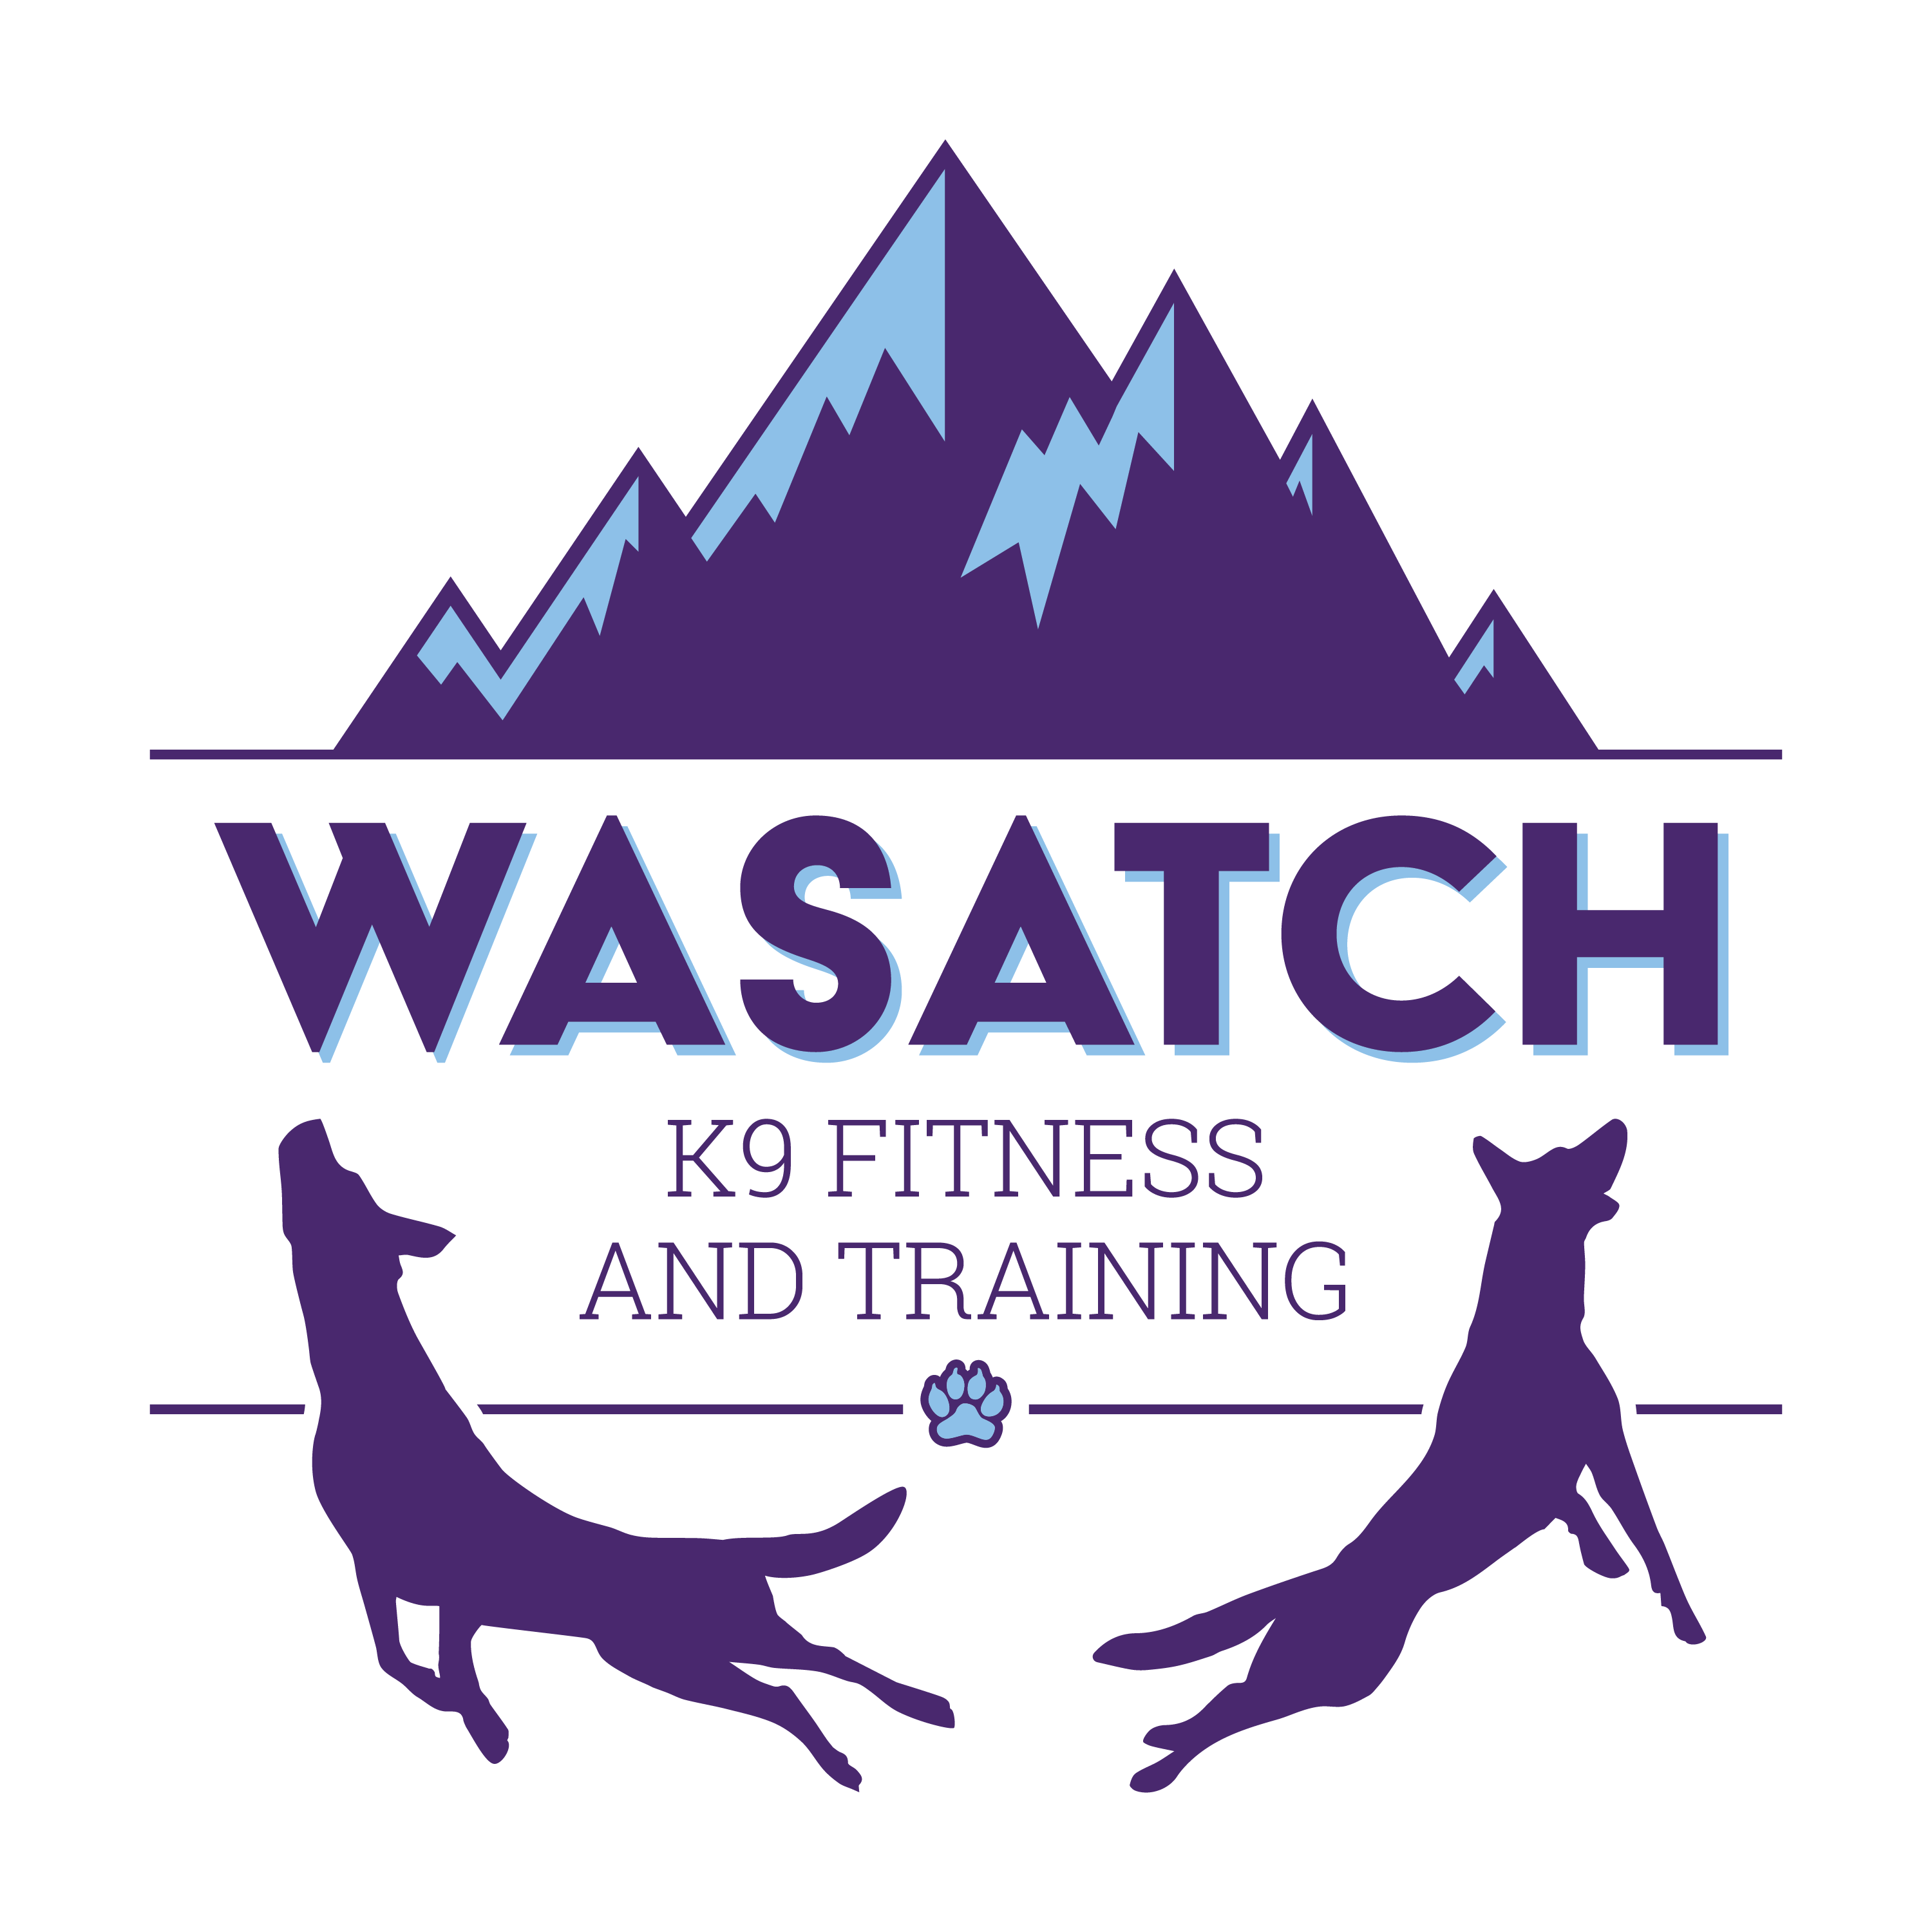 Wasatch K9 Fitness and Training 